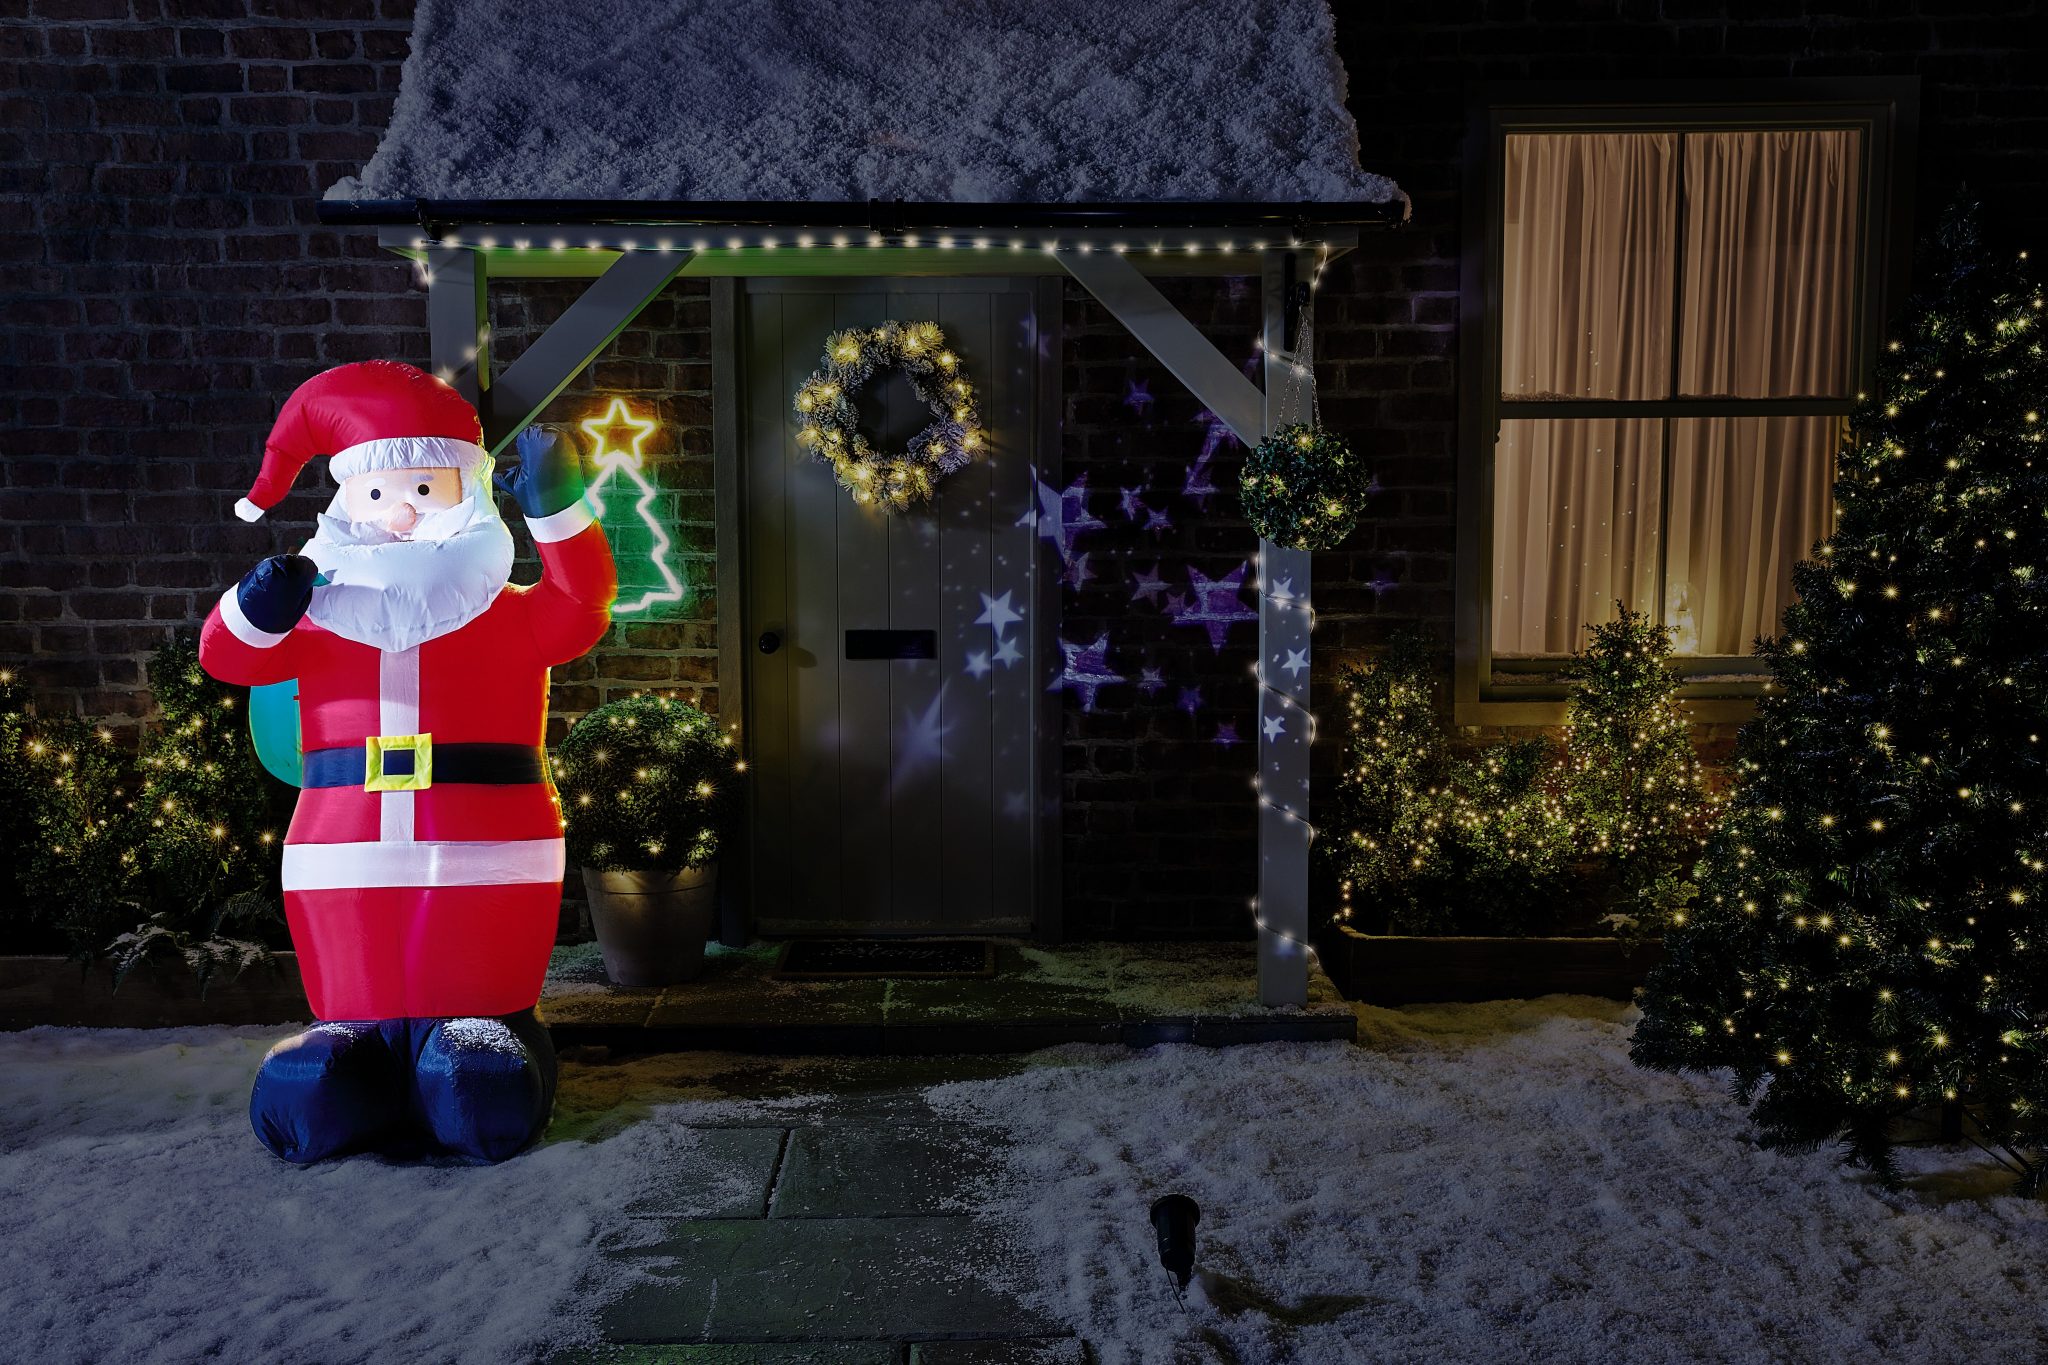 It’s only November but we’re eyeing up Aldi’s giant Christmas decorations